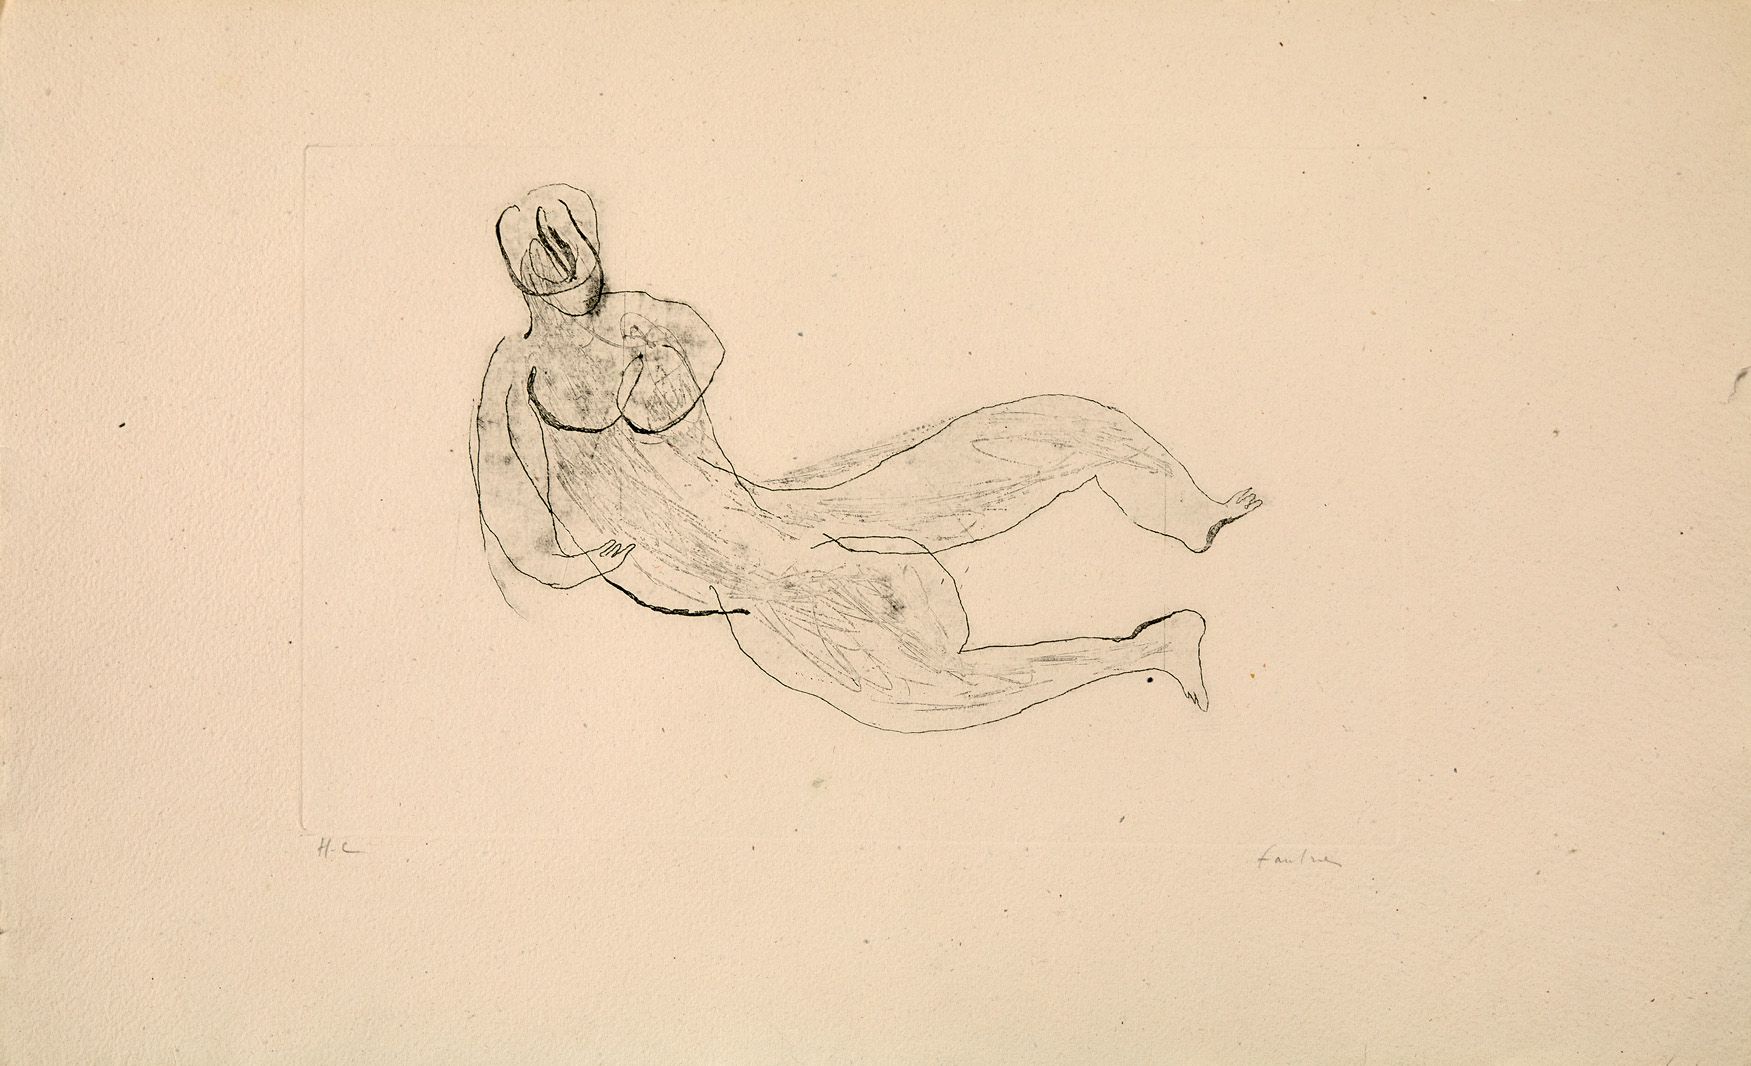 Jean FAUTRIER Jean FAUTRIER (1898 - 1964)

Nude

Etching and heliogravure on pin&hellip;